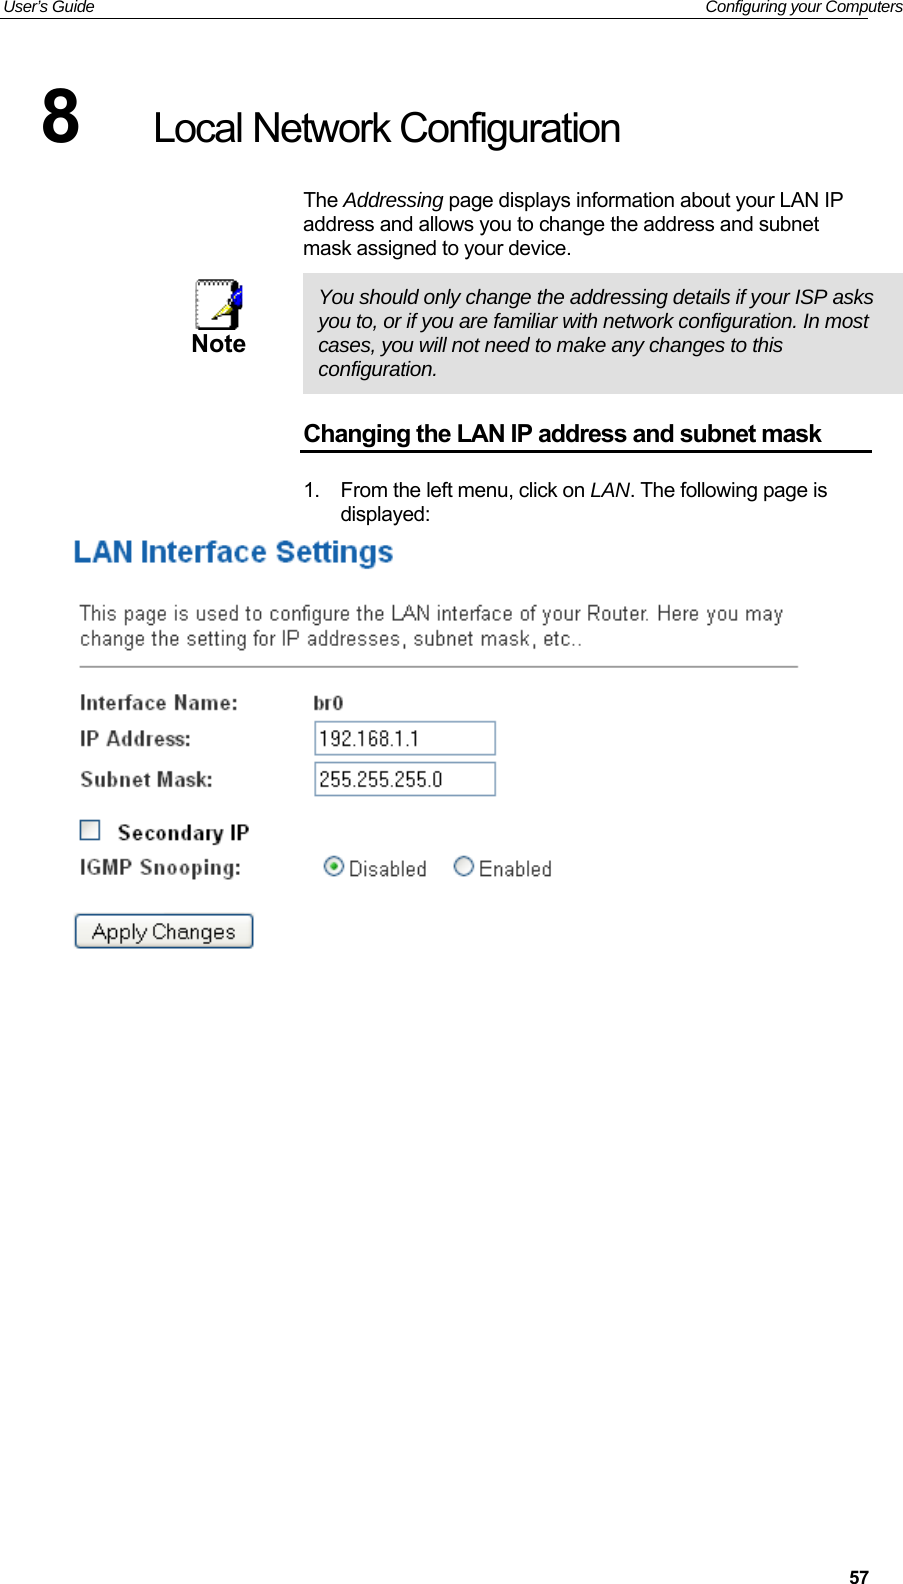 User’s Guide   Configuring your Computers  578  Local Network Configuration The Addressing page displays information about your LAN IP address and allows you to change the address and subnet mask assigned to your device.  Note  You should only change the addressing details if your ISP asks you to, or if you are familiar with network configuration. In most cases, you will not need to make any changes to this configuration. Changing the LAN IP address and subnet mask 1.  From the left menu, click on LAN. The following page is displayed:              